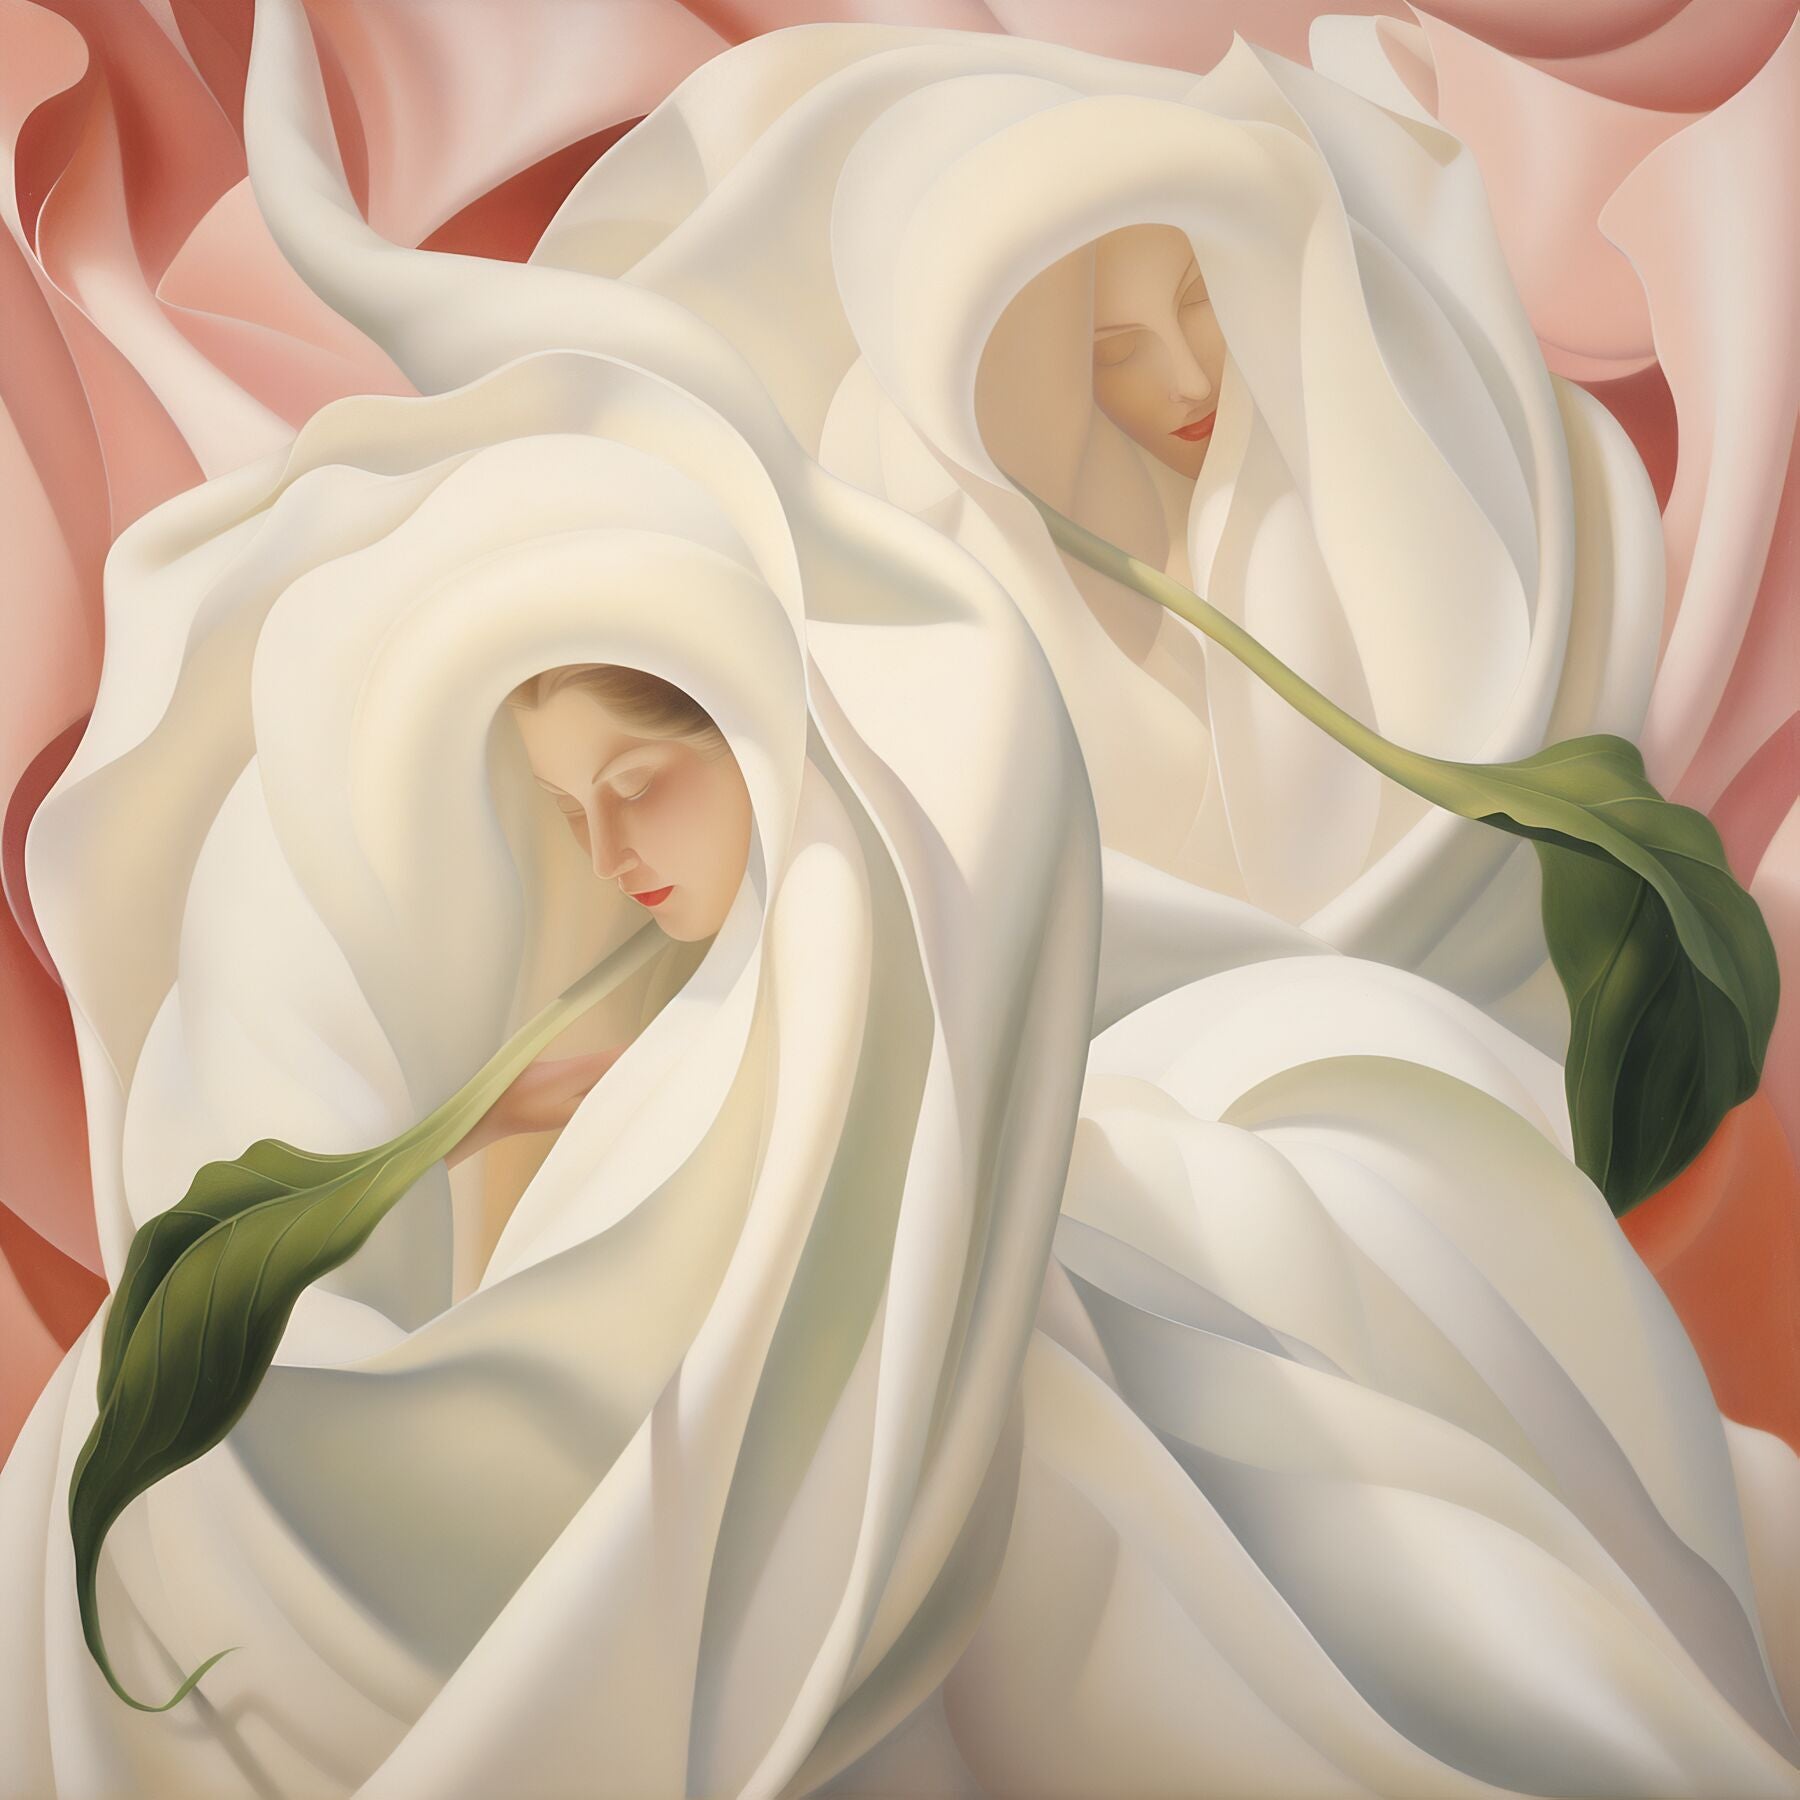 Painting inspired by georgia okeeffe flower women white